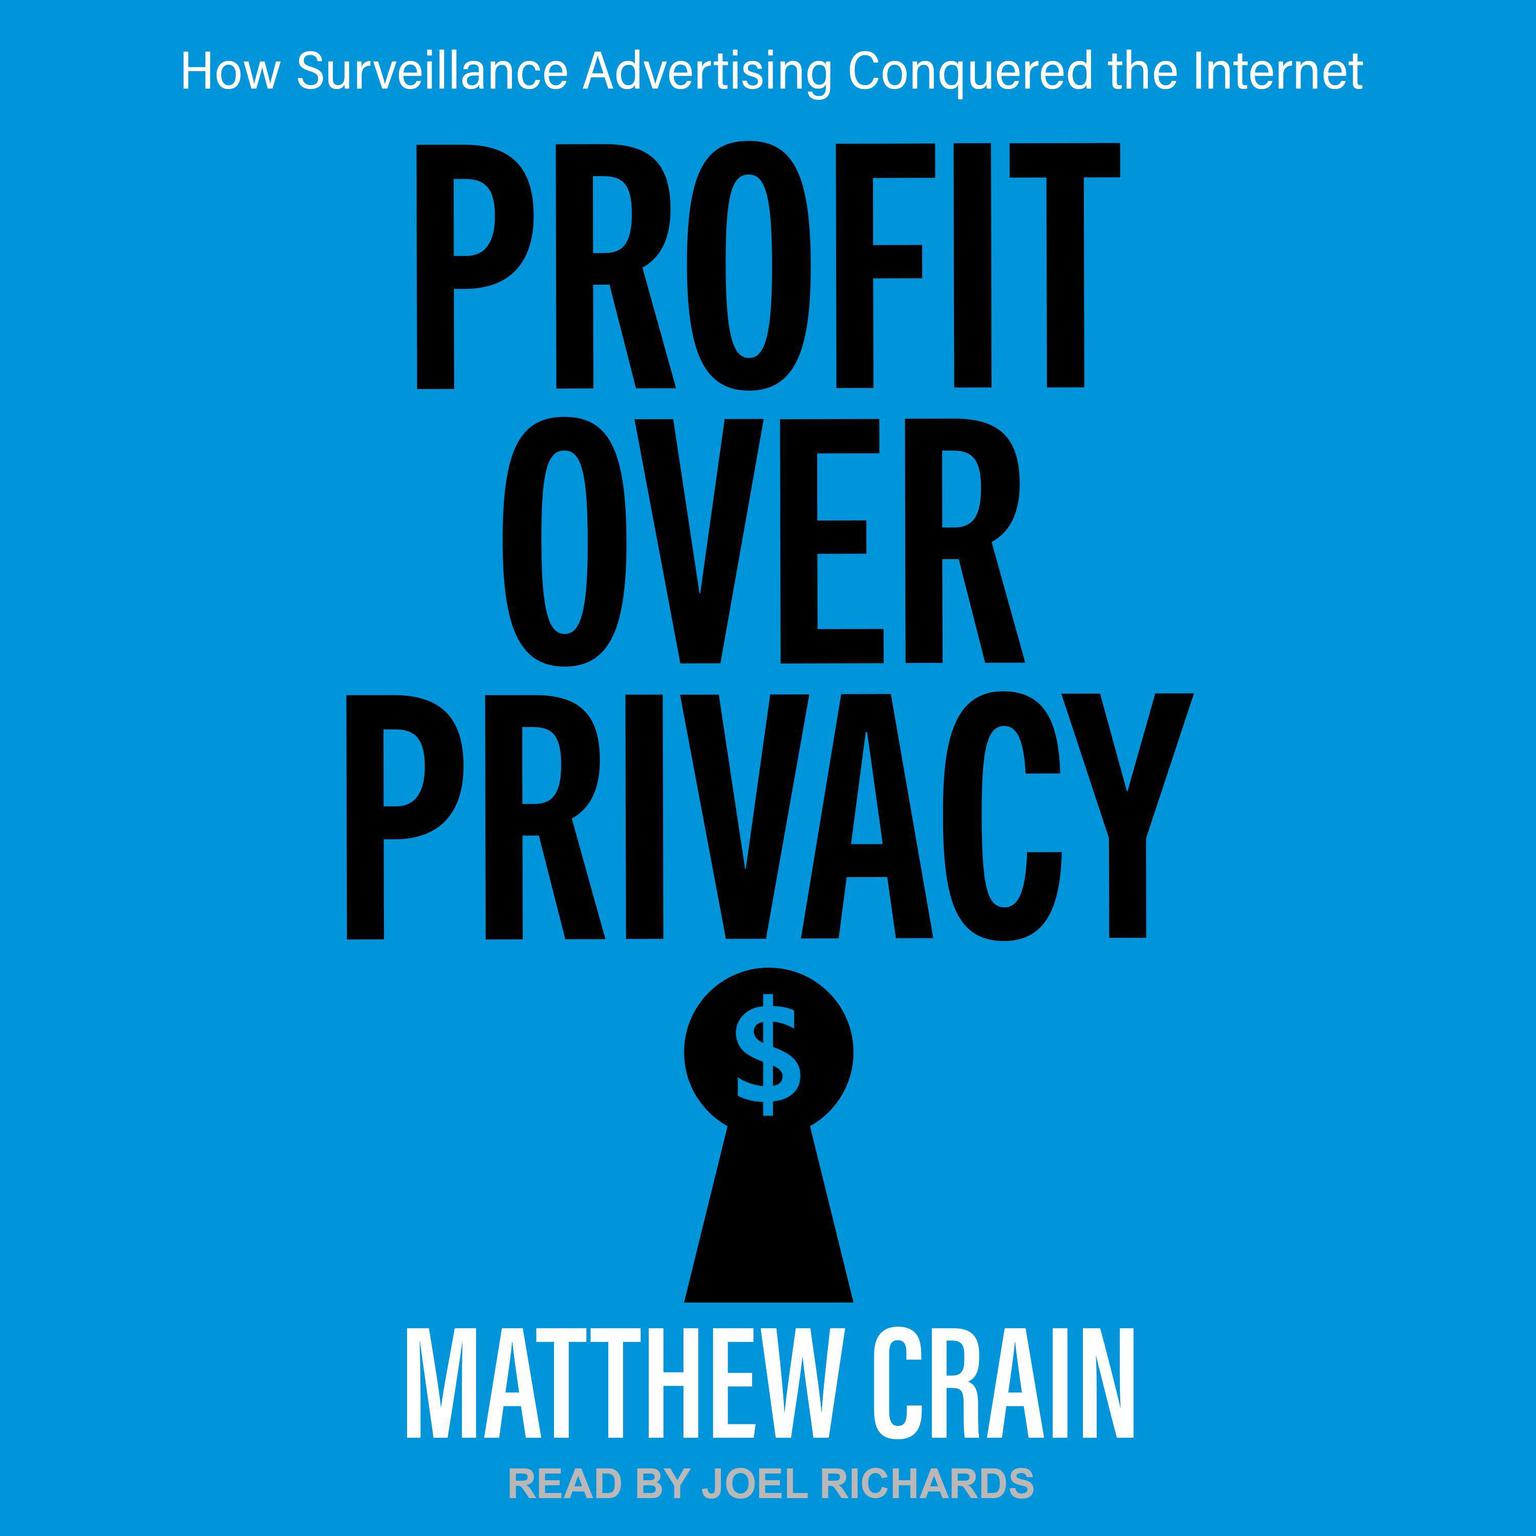 Profit over Privacy: How Surveillance Advertising Conquered the Internet Audiobook, by Matthew Crain